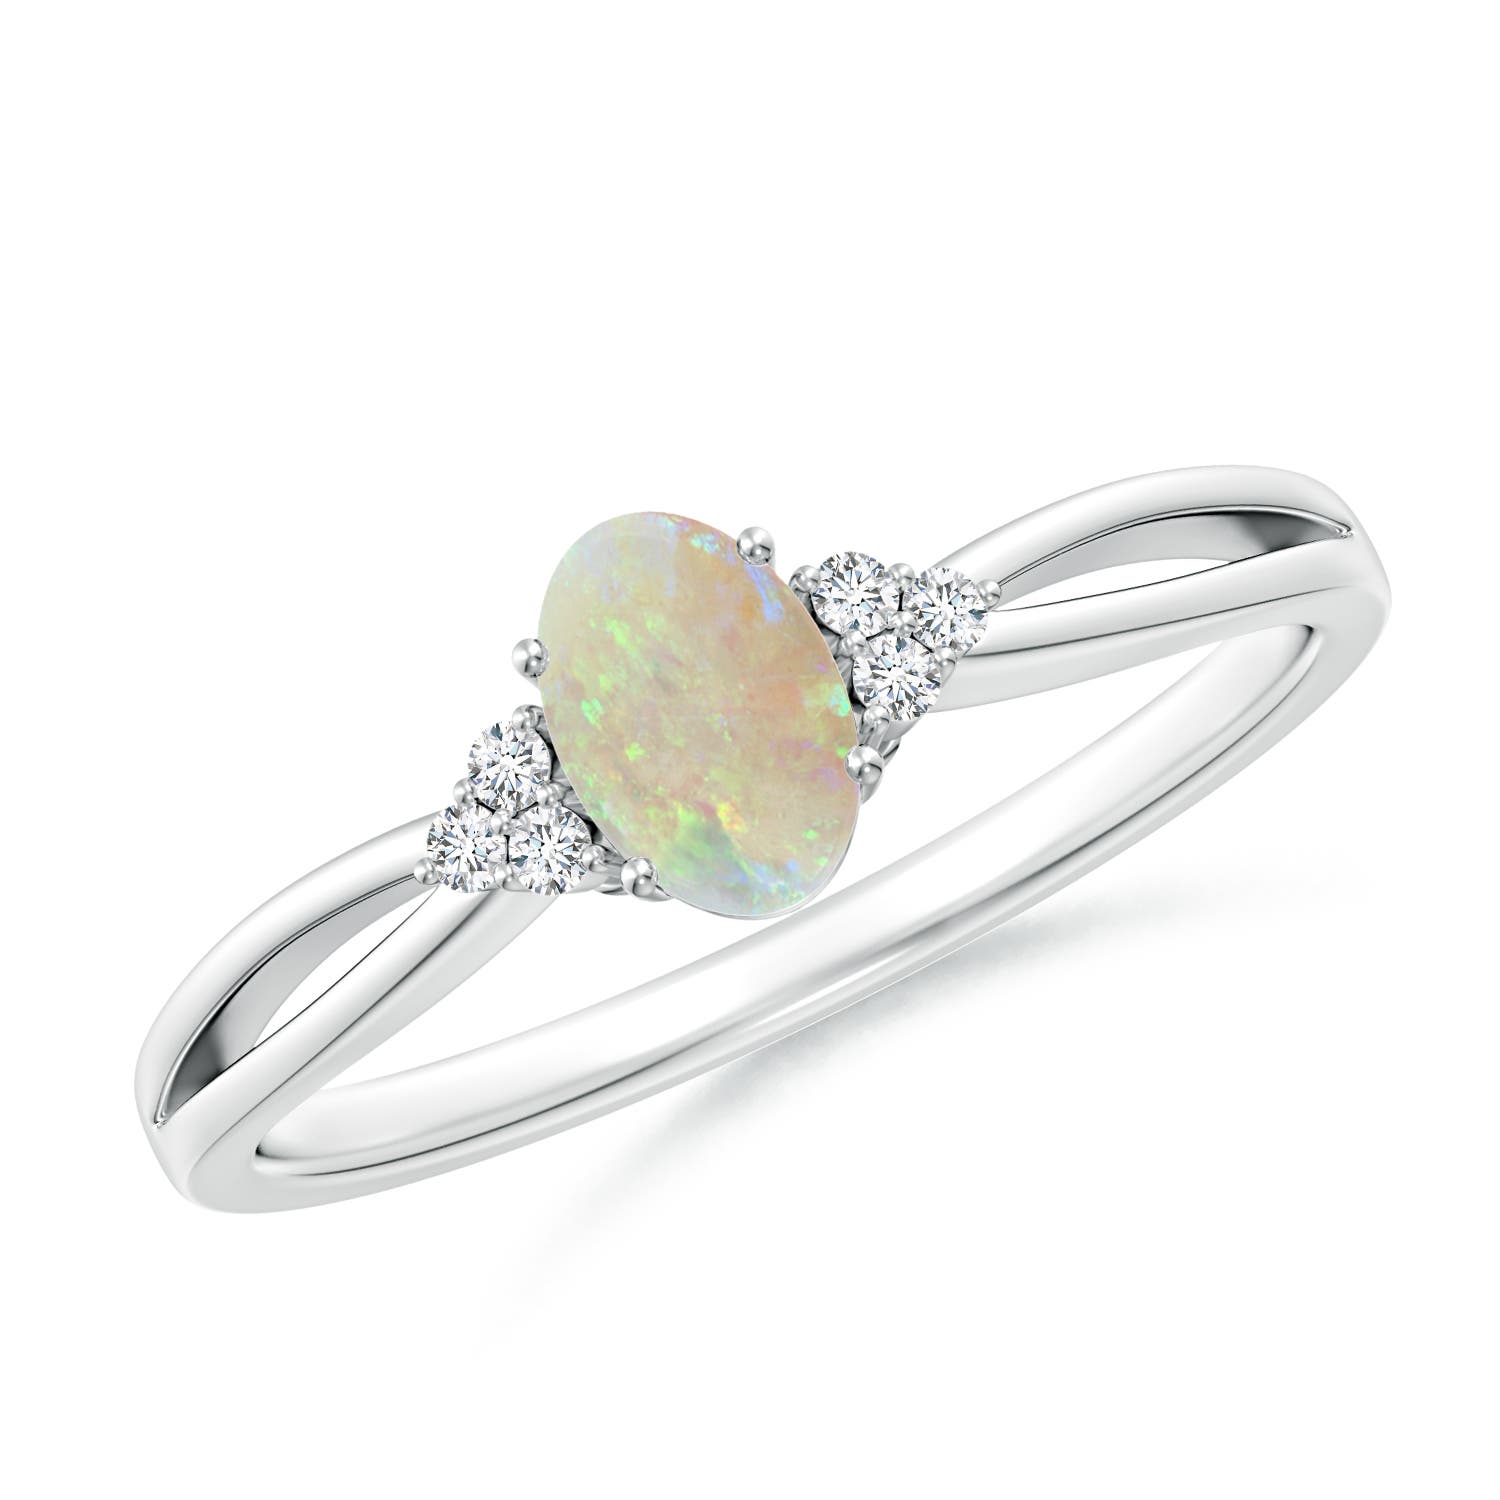 AAA - Opal / 0.34 CT / 14 KT White Gold